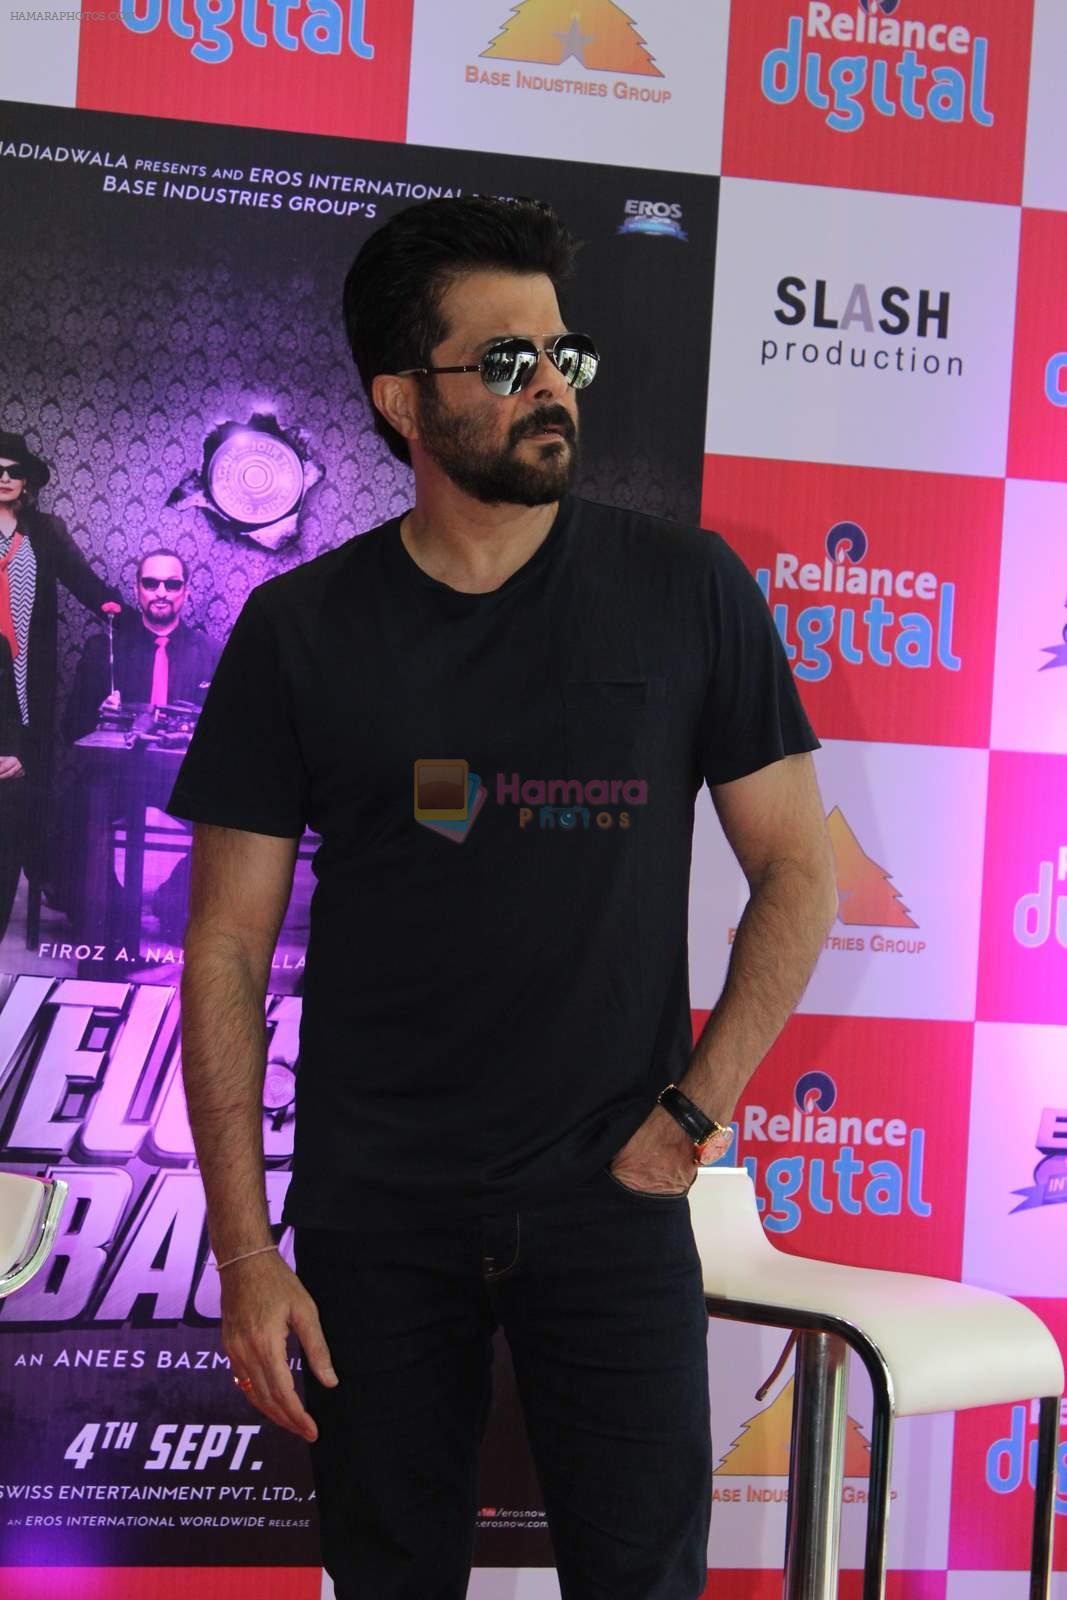 Anil Kapoor at Welcome Back promotions in Reliance Digital, Juhu on 29th Aug 2015